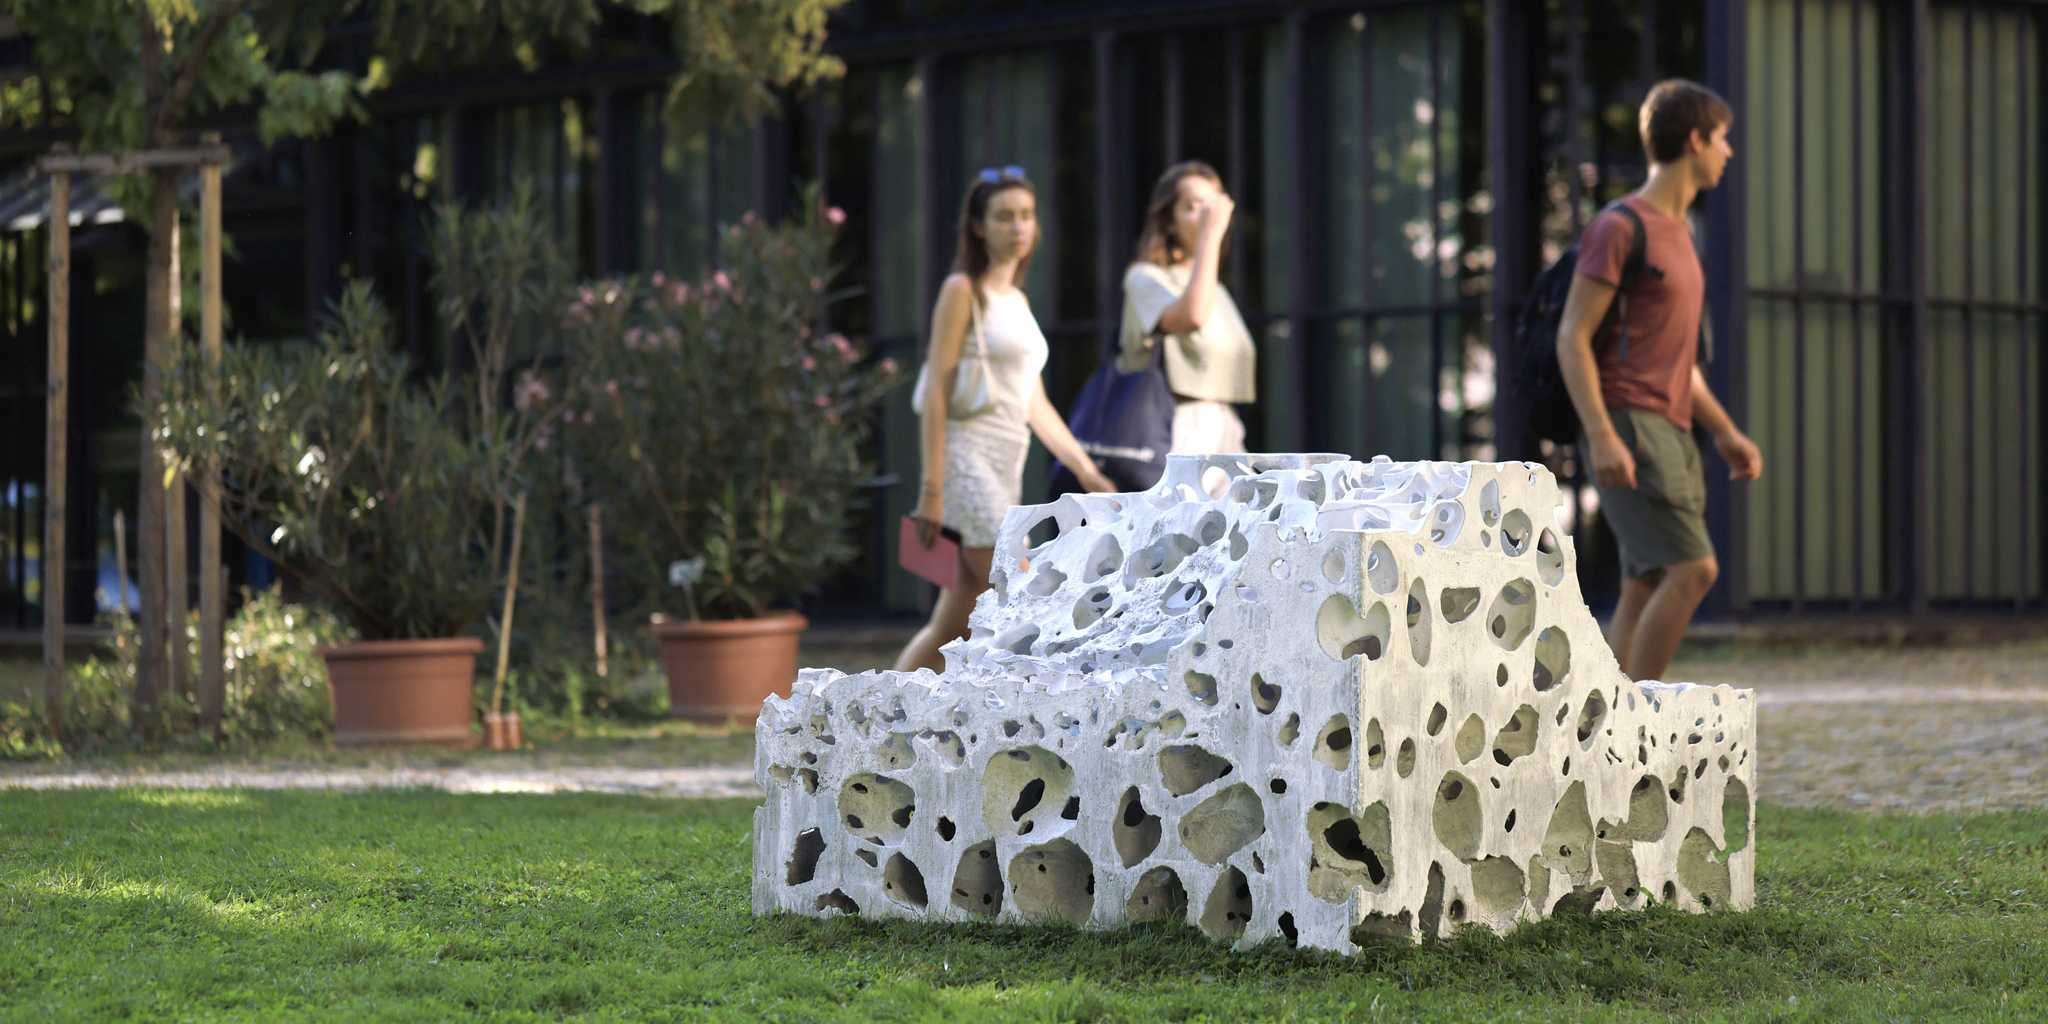 Concrete sculpture by ETH researcher Vasily Sitnikov on the lawn of the Old Botanical Garden in Zurich.